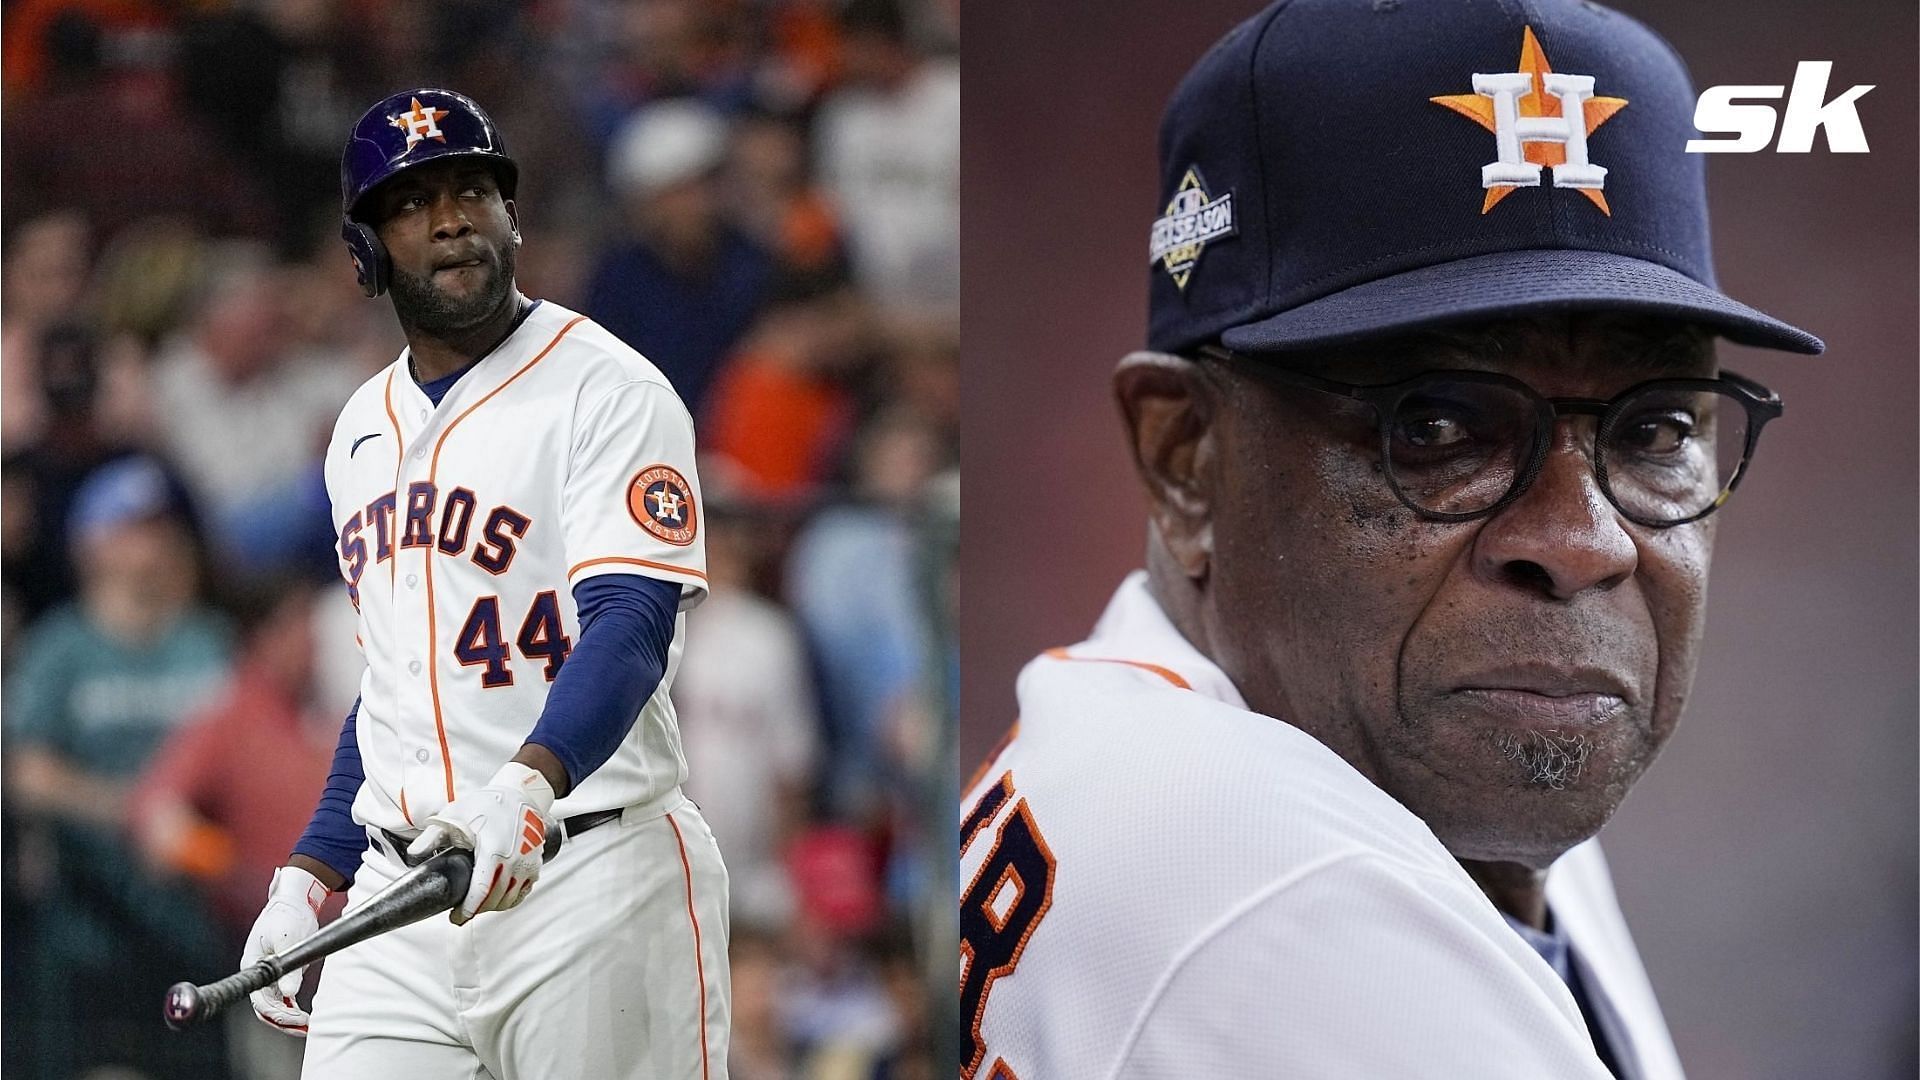 Dusty Baker has raised some eyebrows for his bizarre response when asked about Yordan Alvarez